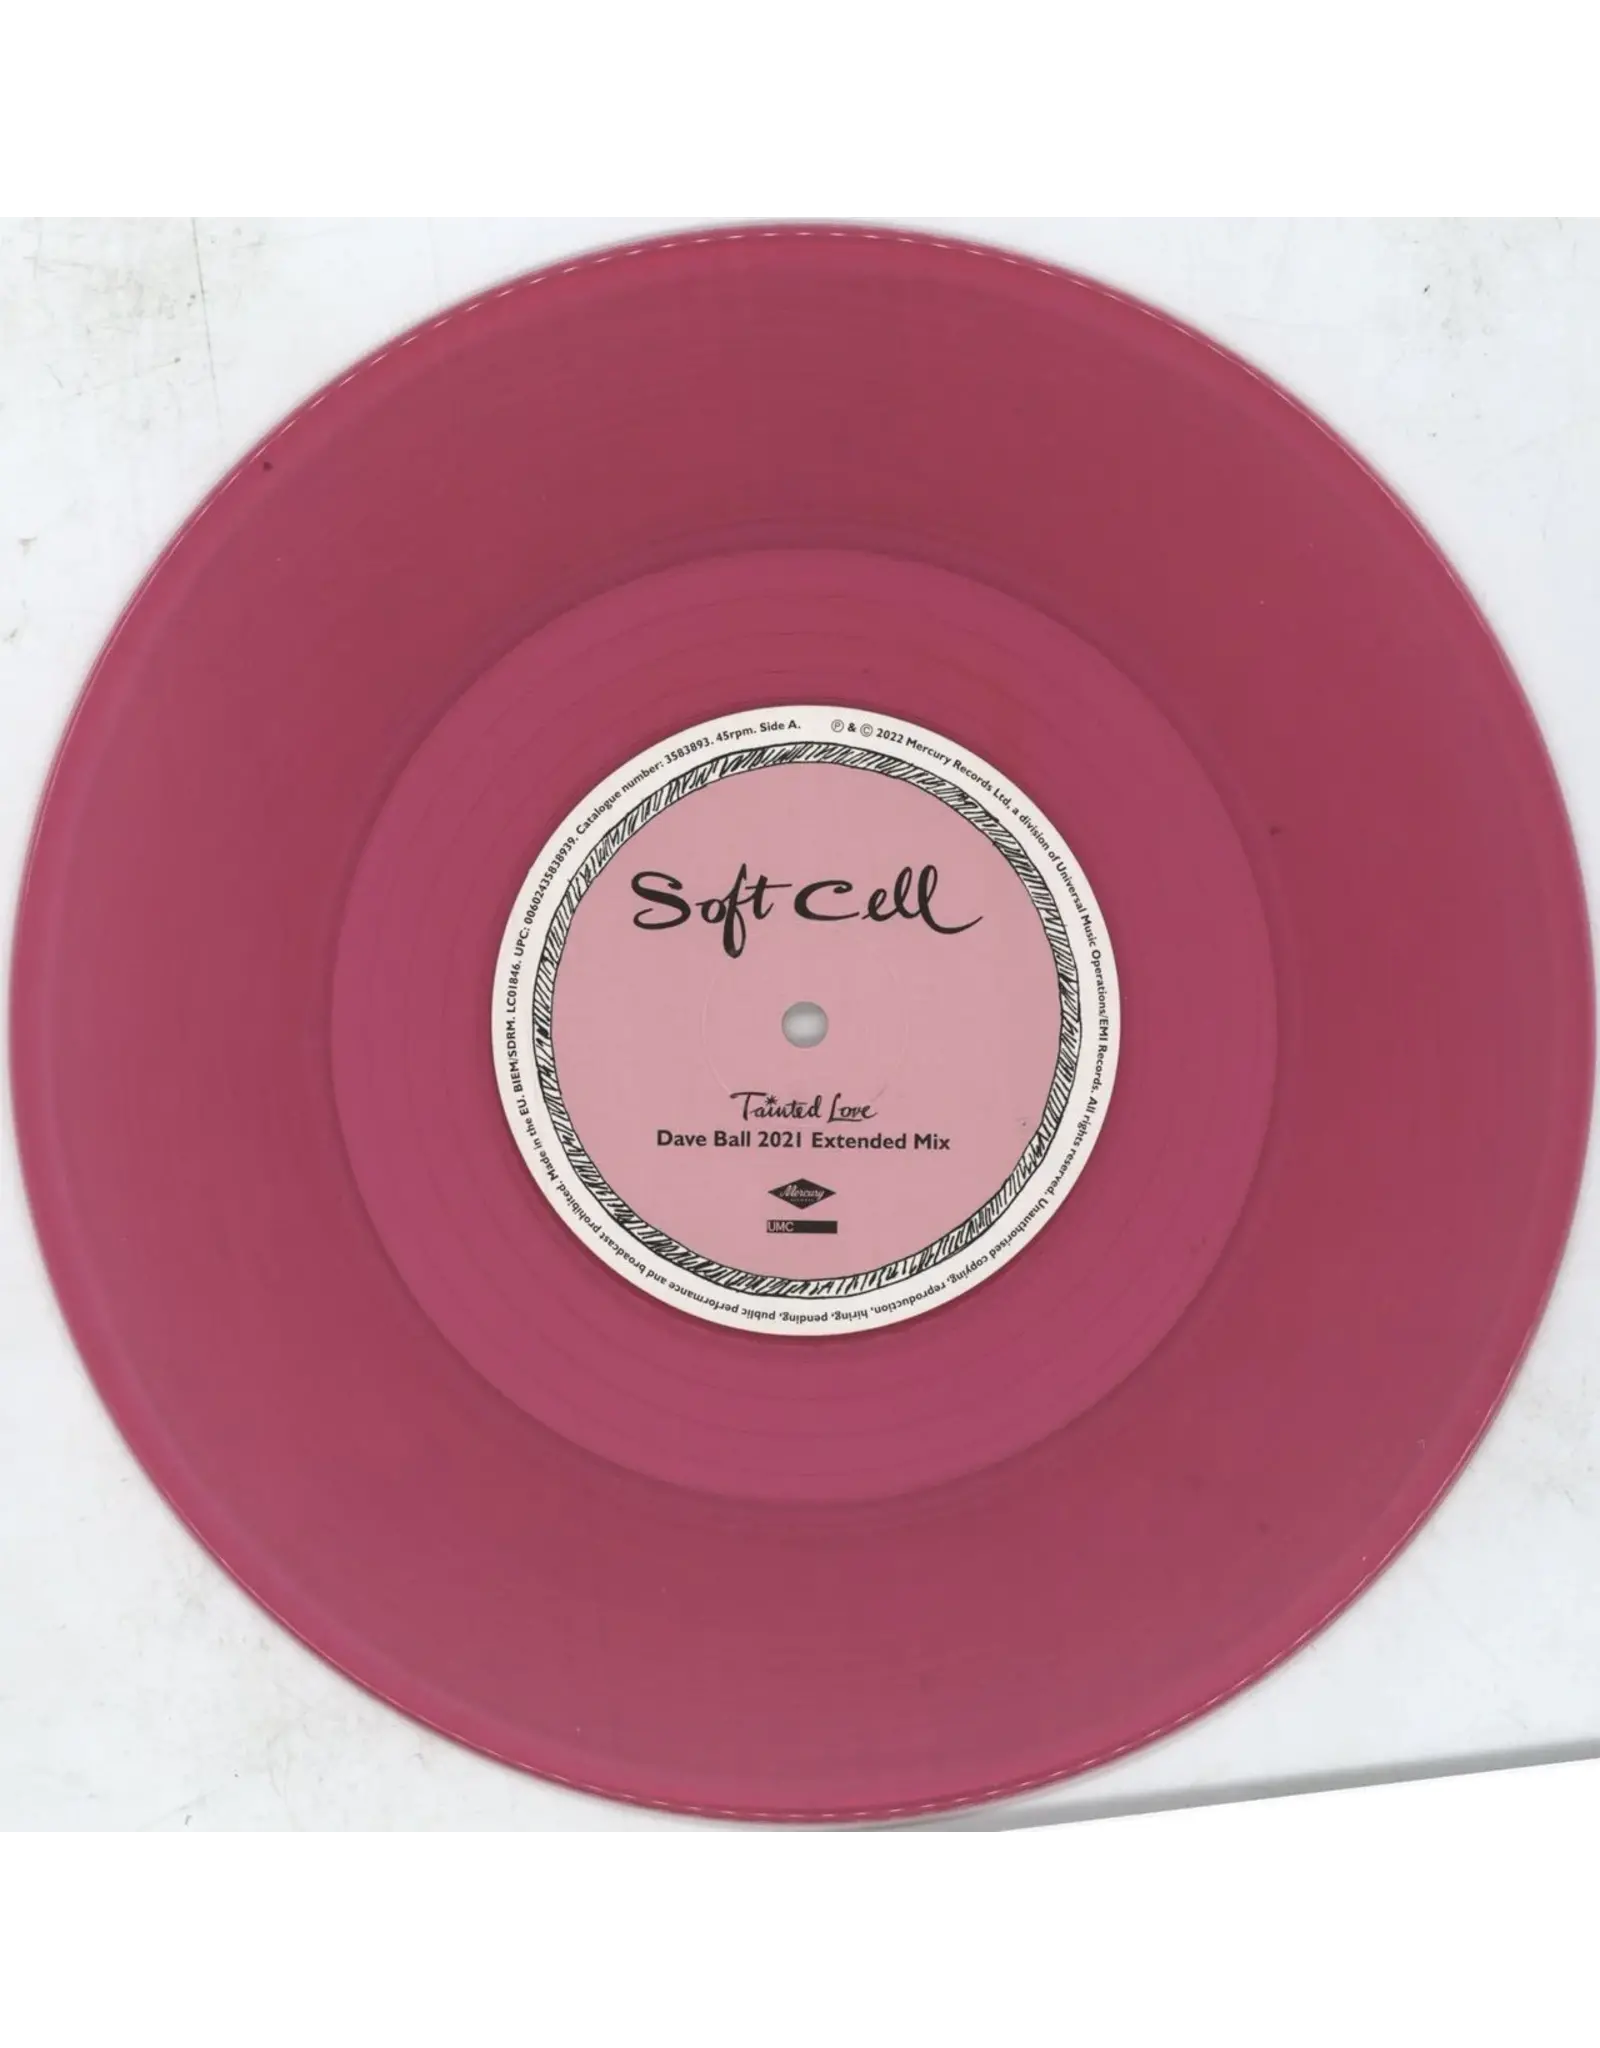 Soft Cell - Tainted Love 40 (10" Pink Vinyl)